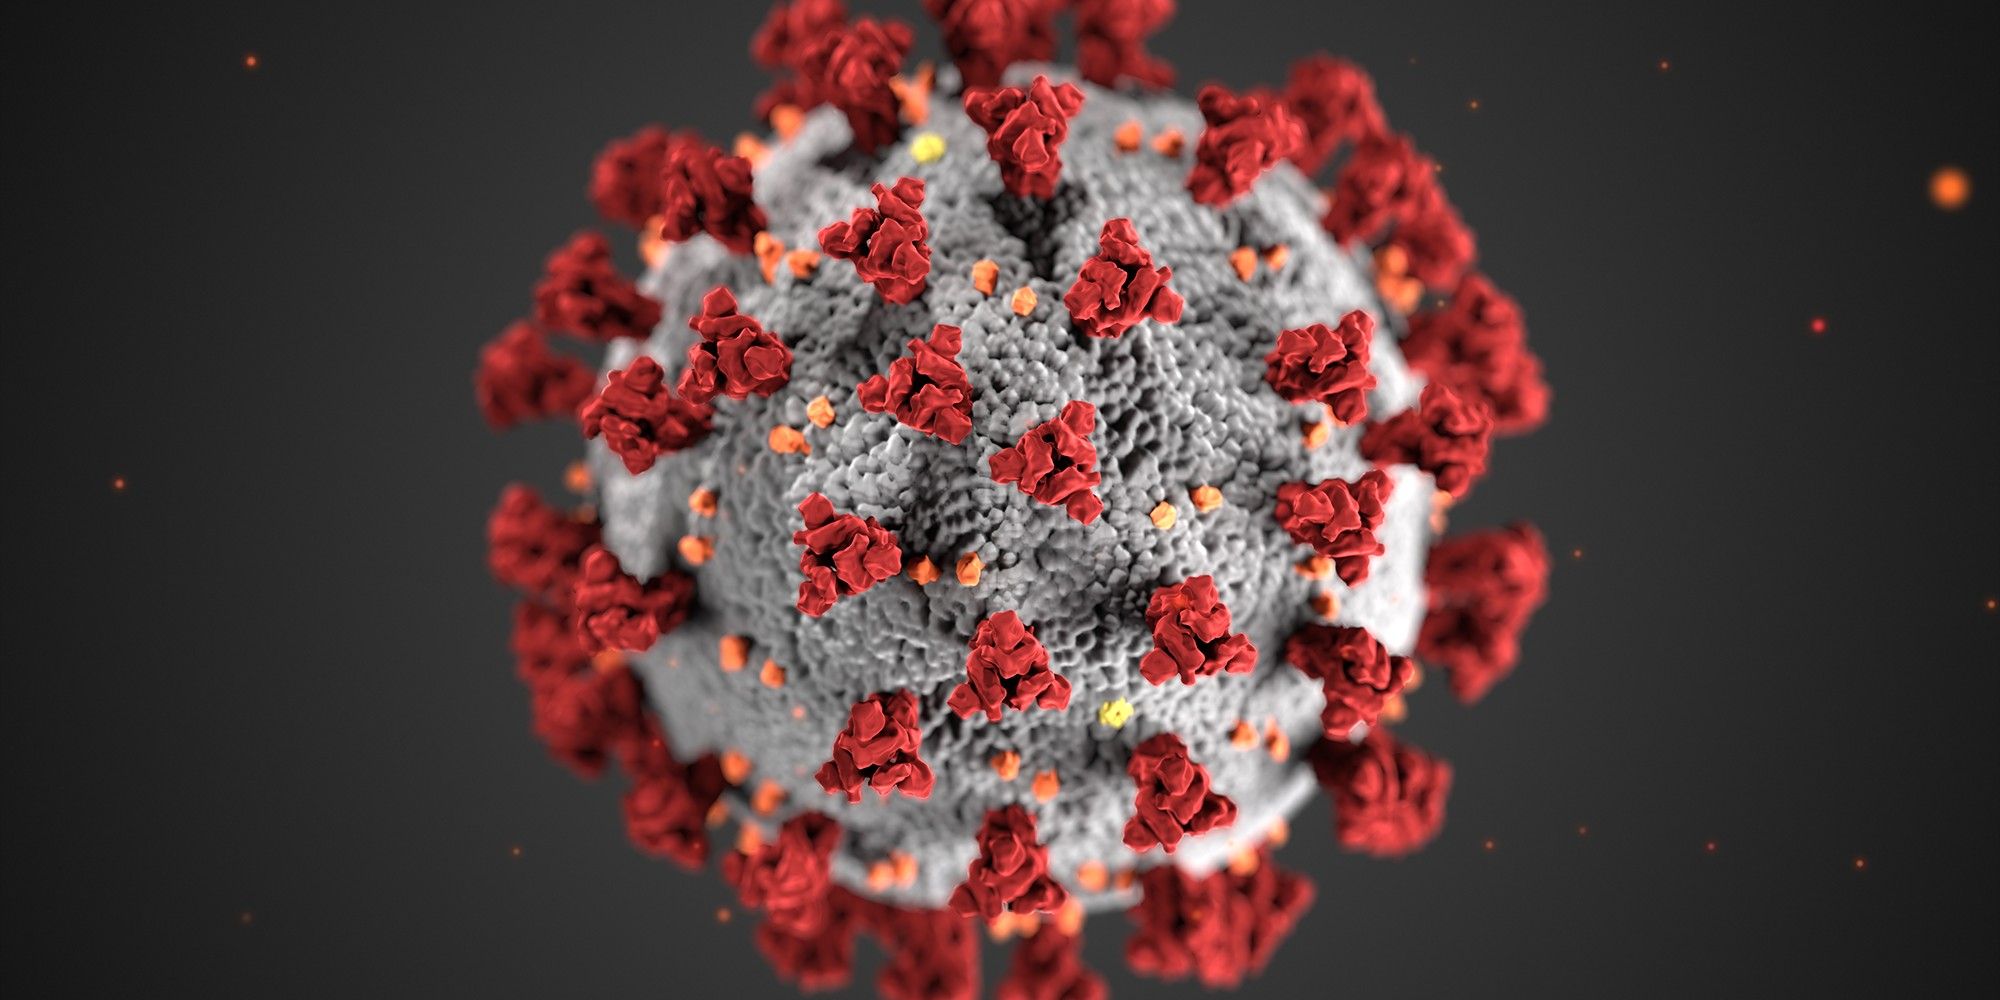 How Big Data Can Be Used To Slow Coronavirus Outbreak